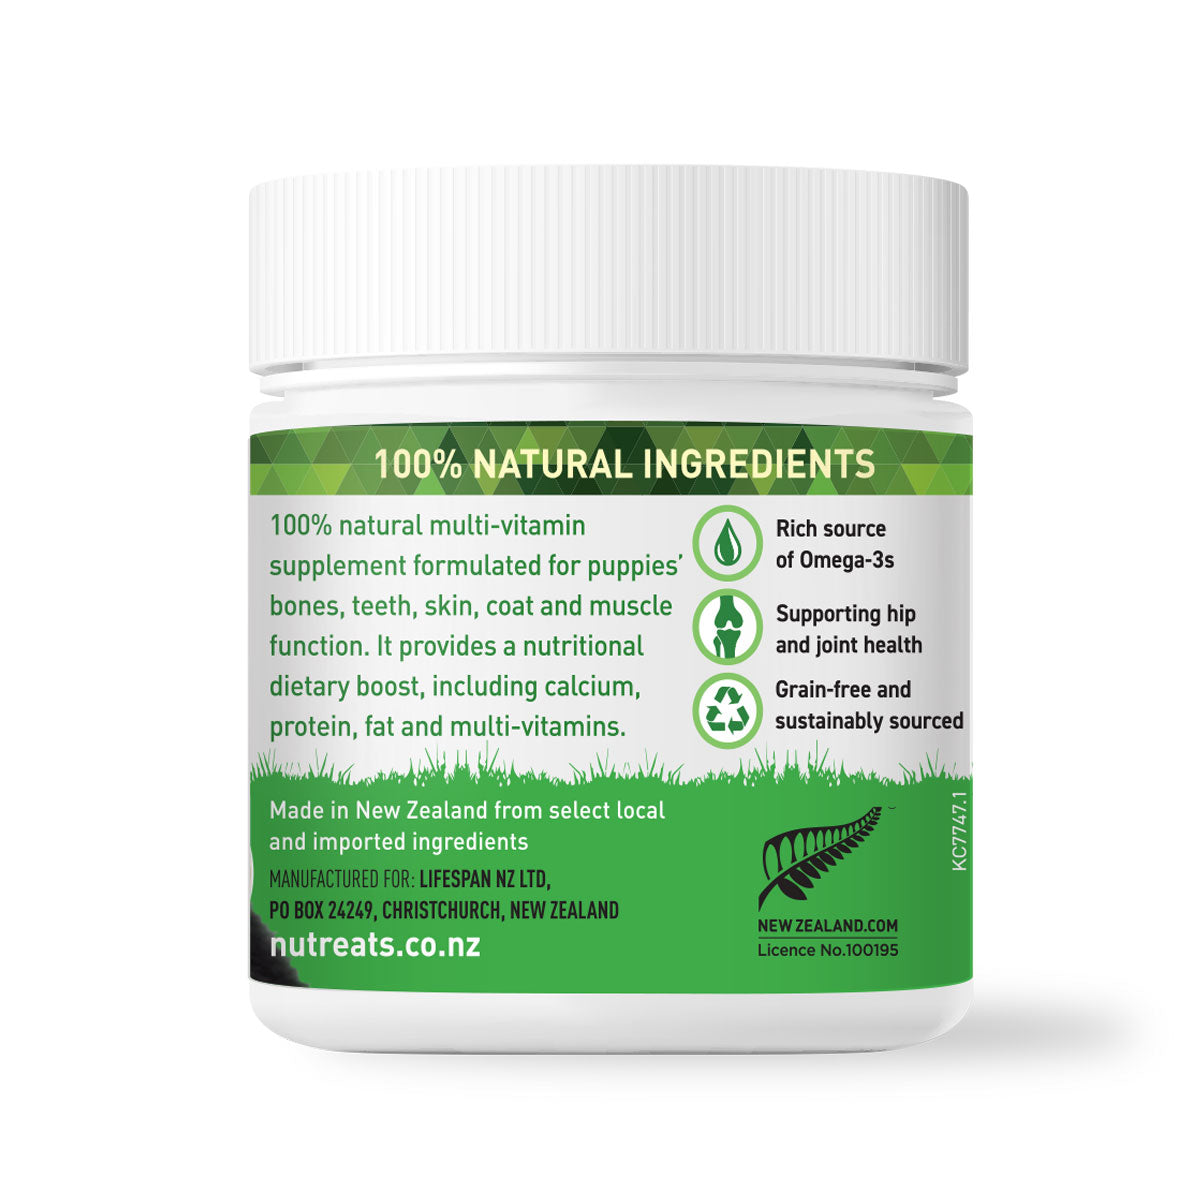 Nutreats puppy prime nutritional supplement powder for puppies and young dogs. 100% natural and sustainably sourced.